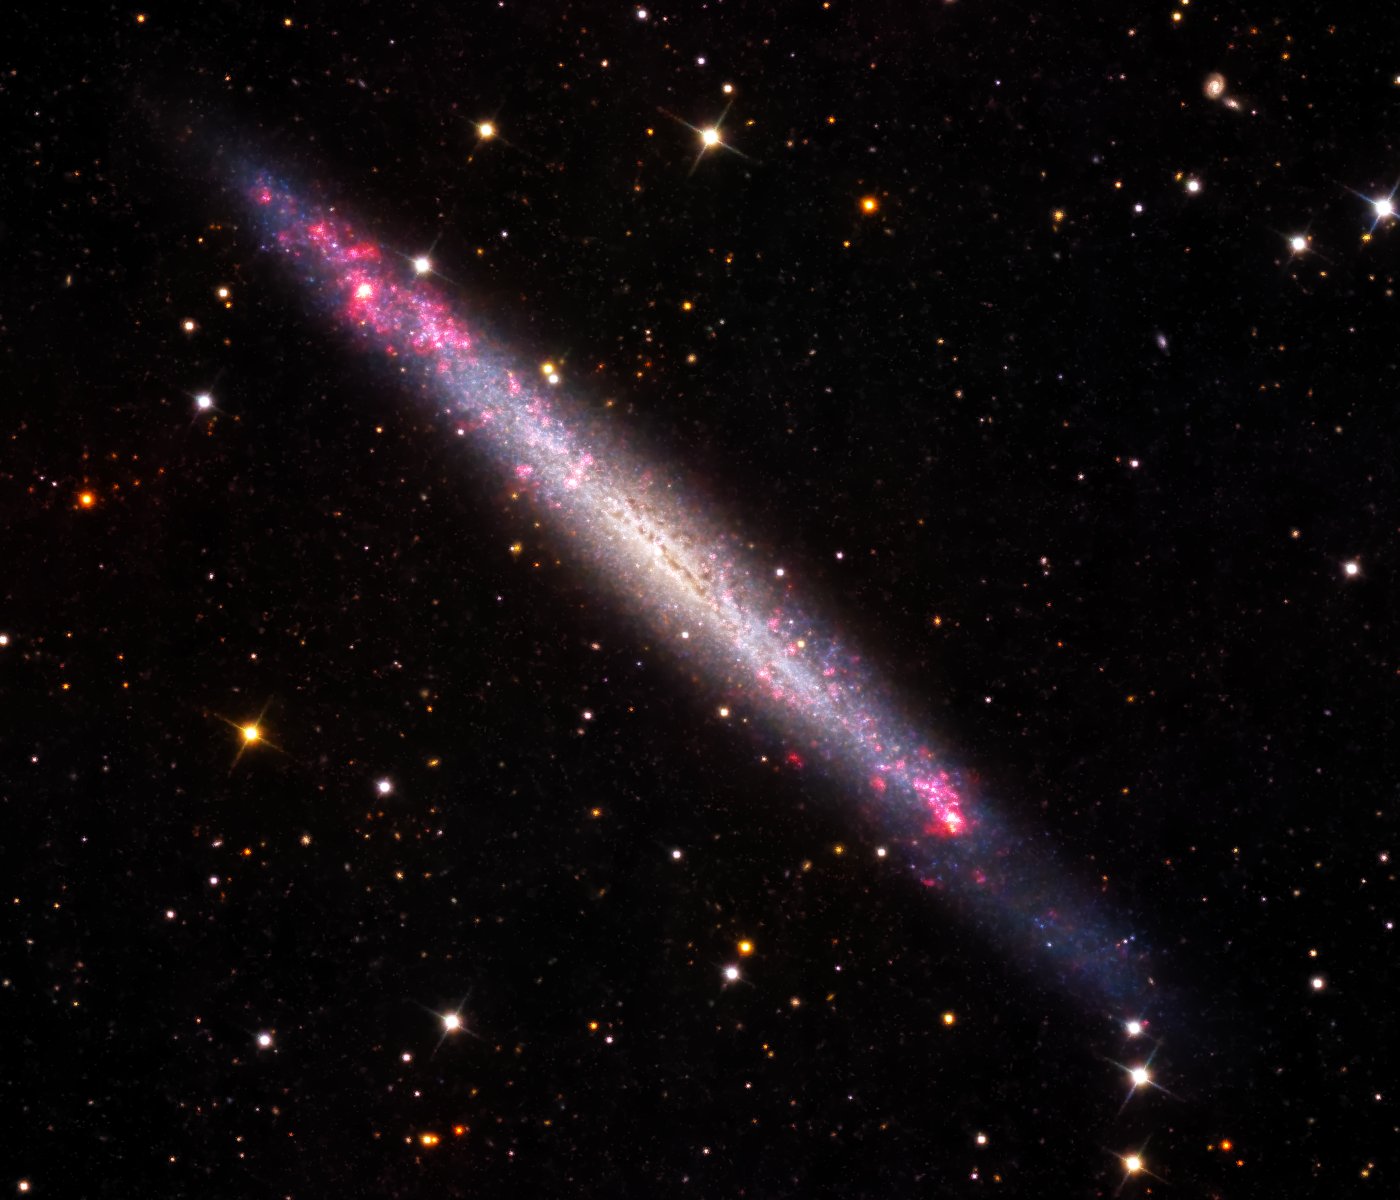 NGC 4244 (Caldwell 66) in H-alpha and continuum light